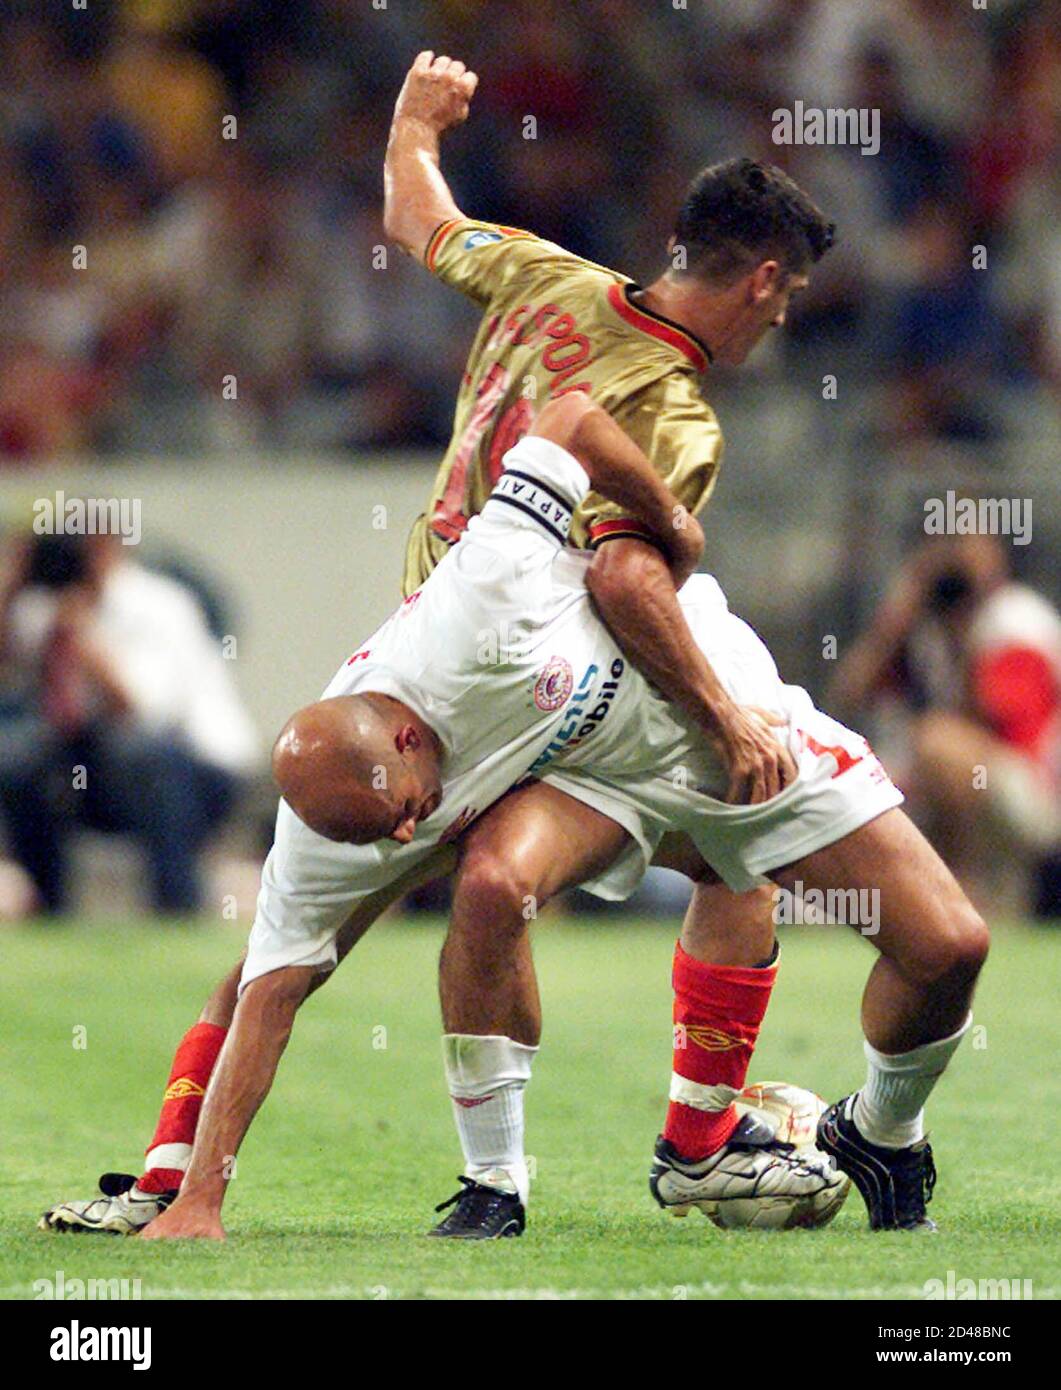 Galatasaray's Cihan Haspolatli (R) and Olympiakos' Predrag Djordjevic (L)  wrestle for the ball during a game between Turkey's Galatasaray and Greek  Olympiakos in the Olympic Stadium in Istanbul July 31, 2002. Istanbul's